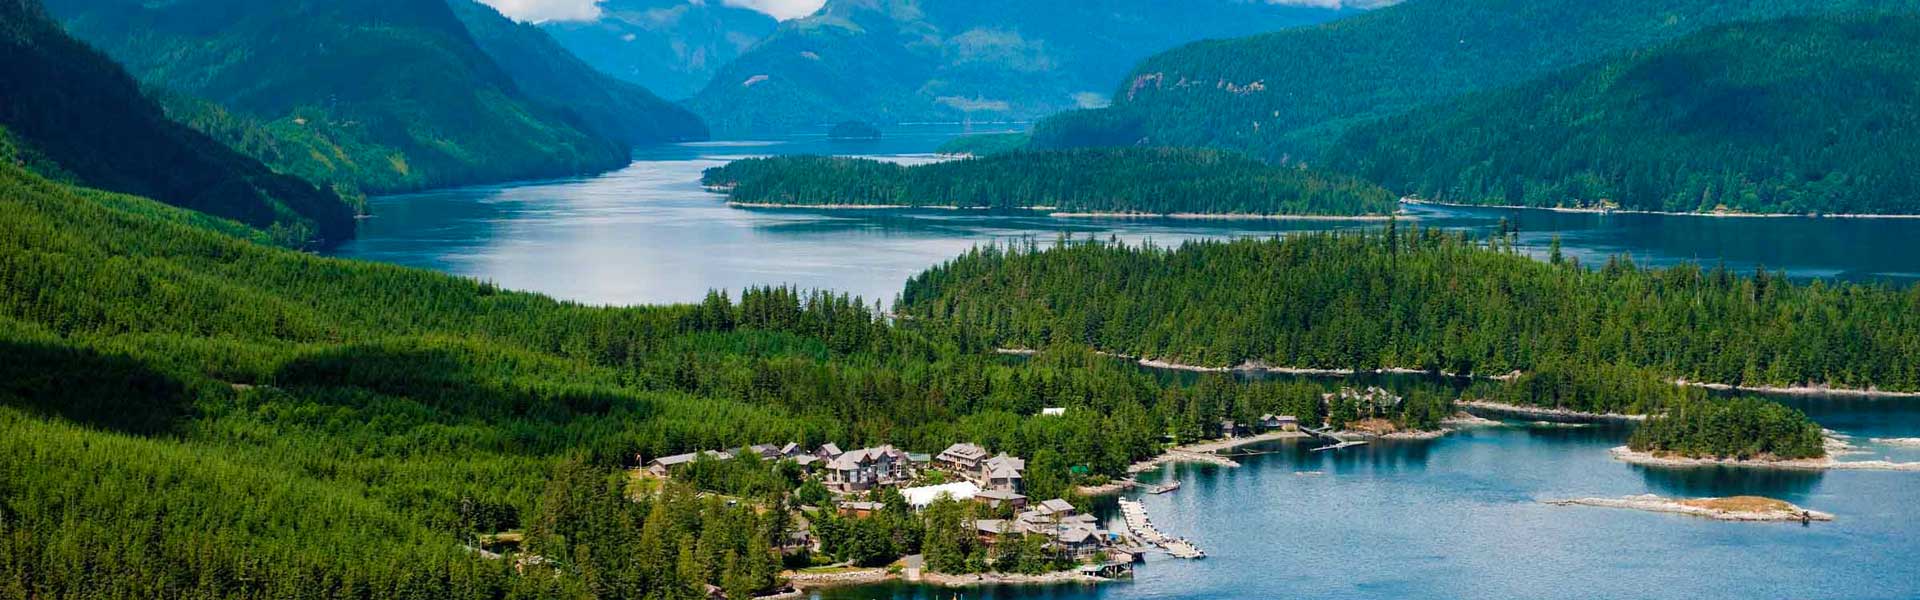 Our Best Canada West Coast Vacation Packages and Road Trips